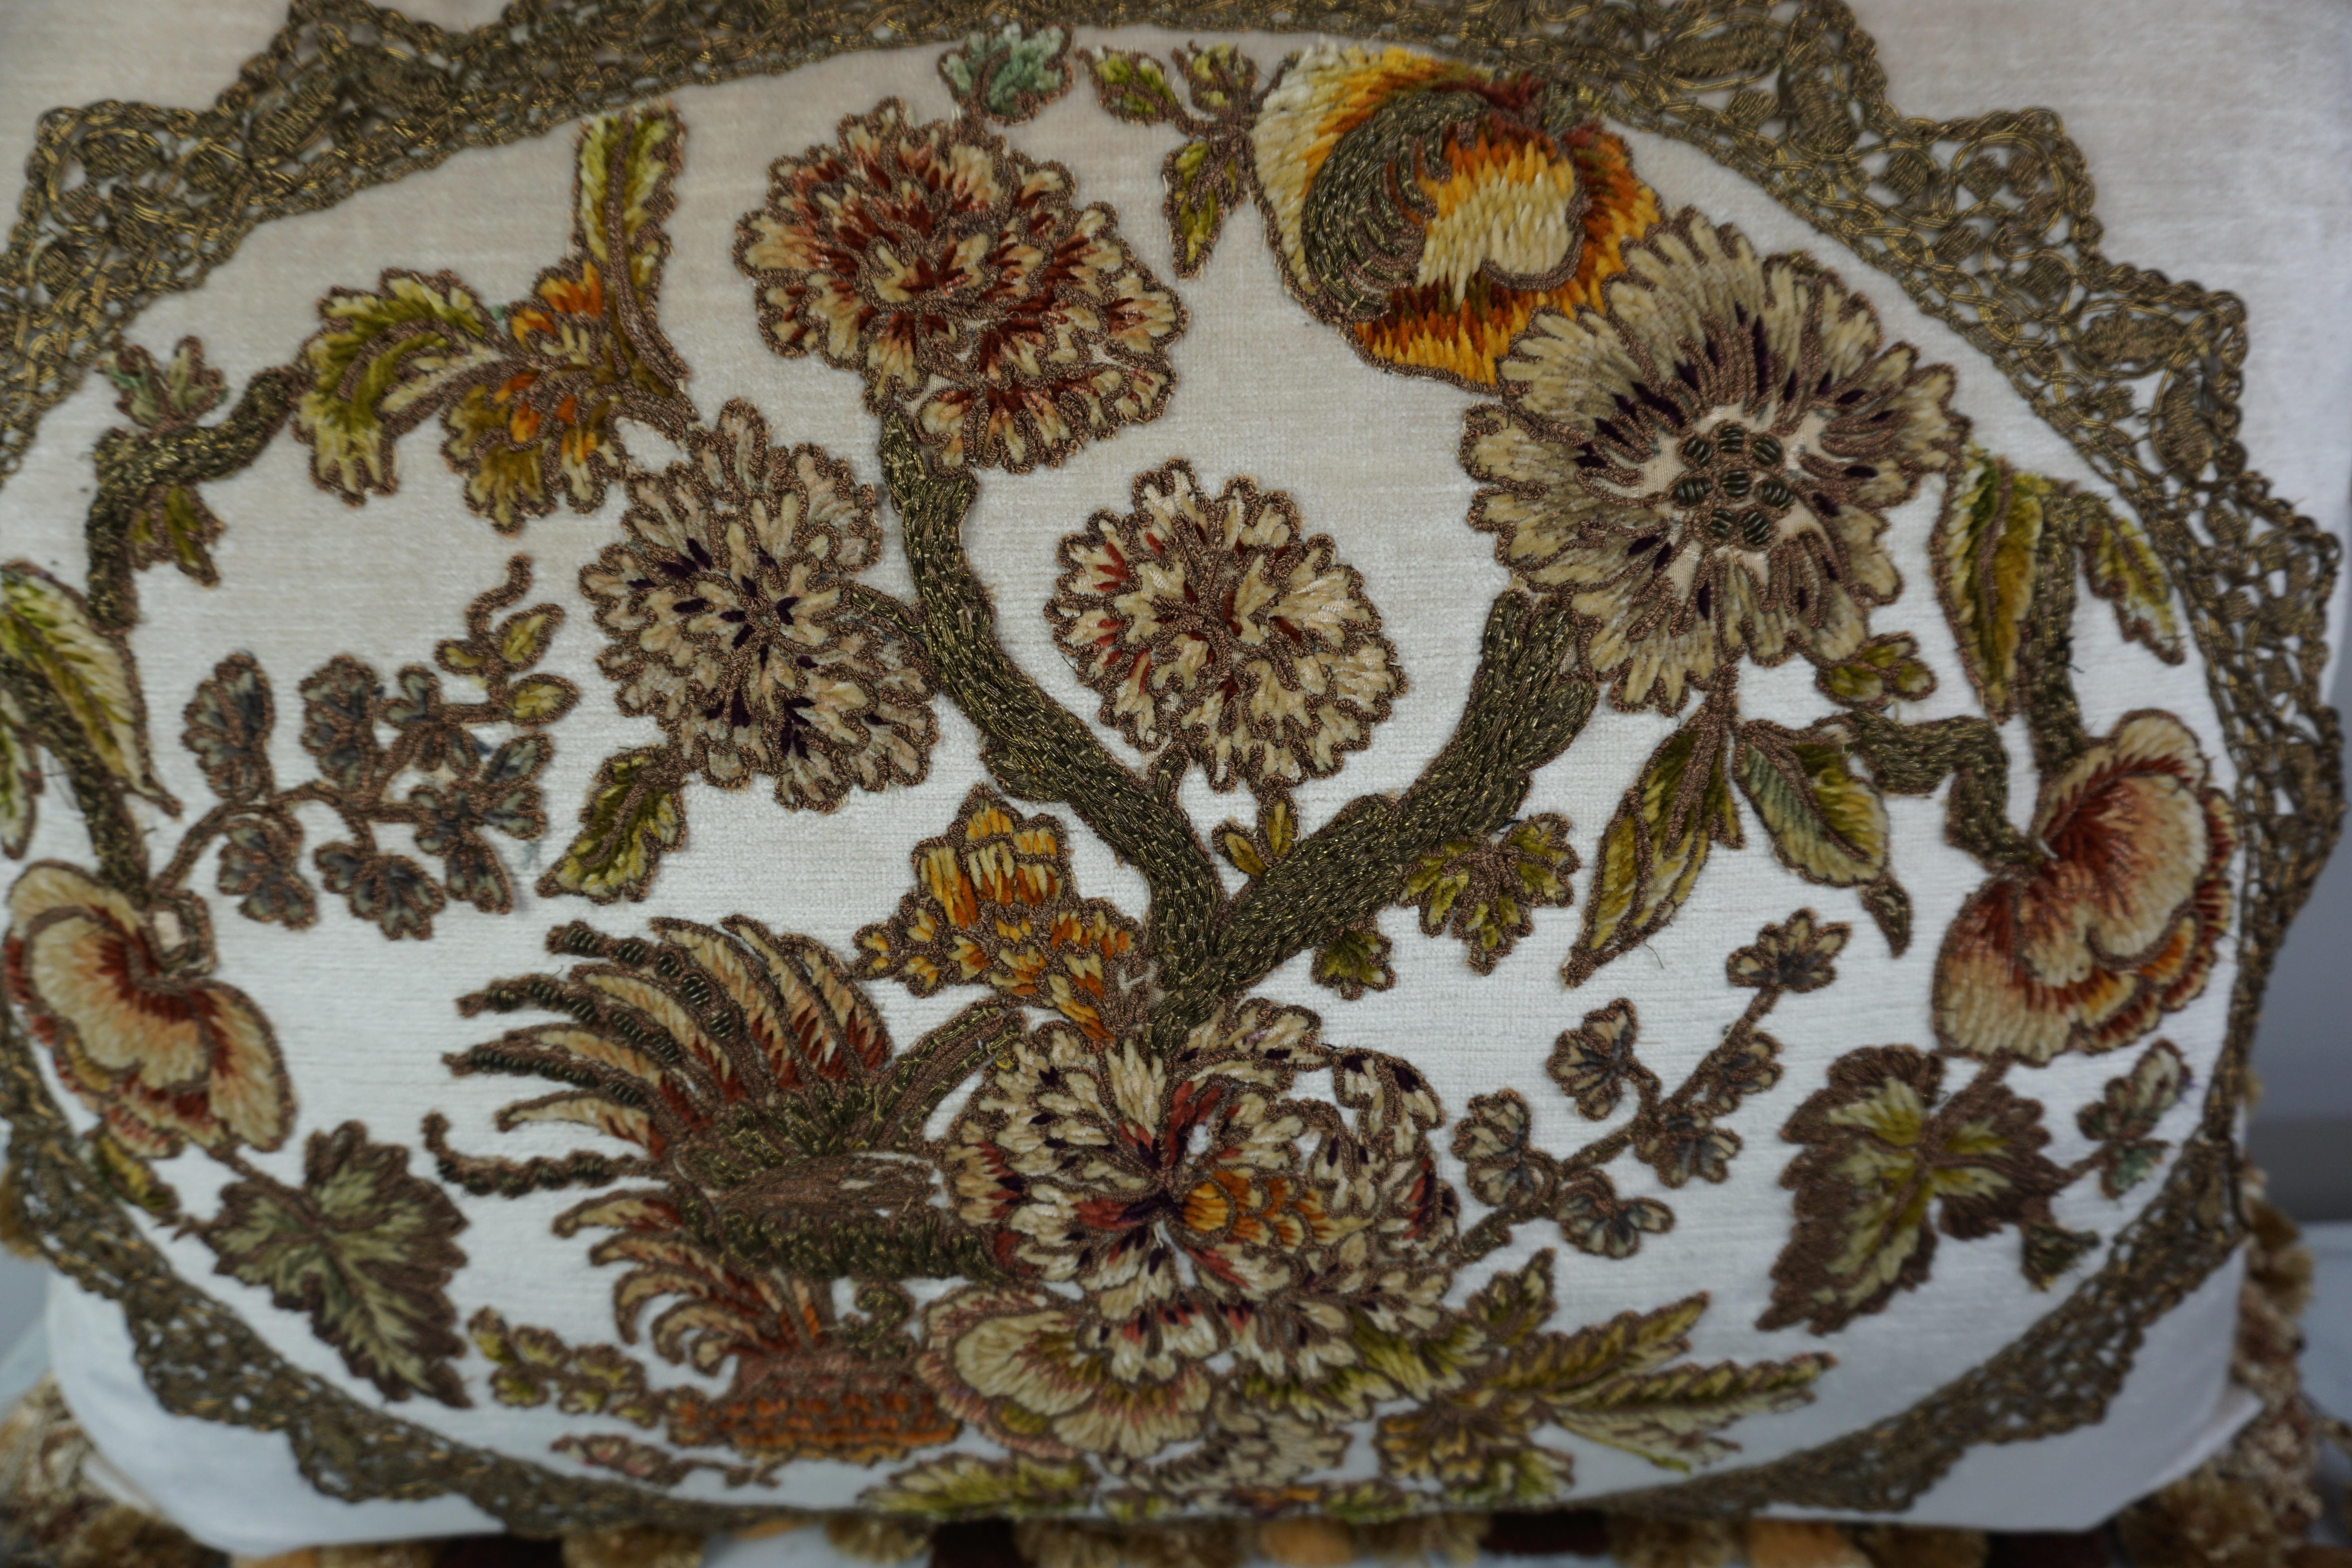 Rococo Metallic and Chenille Appliqued Pillow by Melissa Levinson